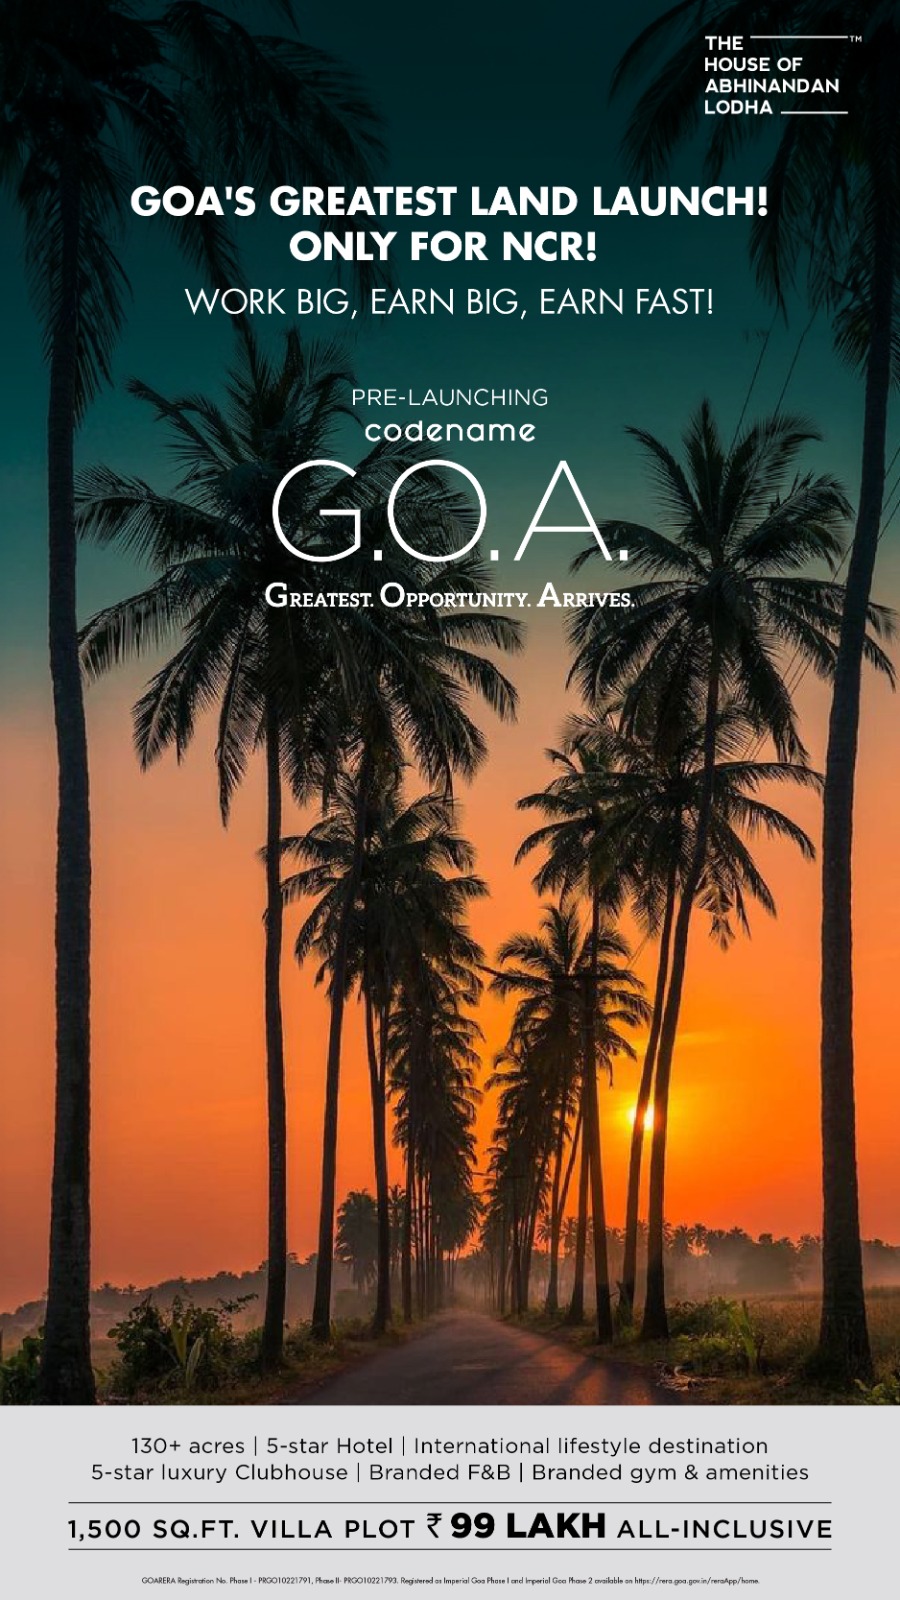 Unveiling G.O.A: The Pinnacle of Luxury Real Estate by Abhinandan Lodha in Goa's NCR Update